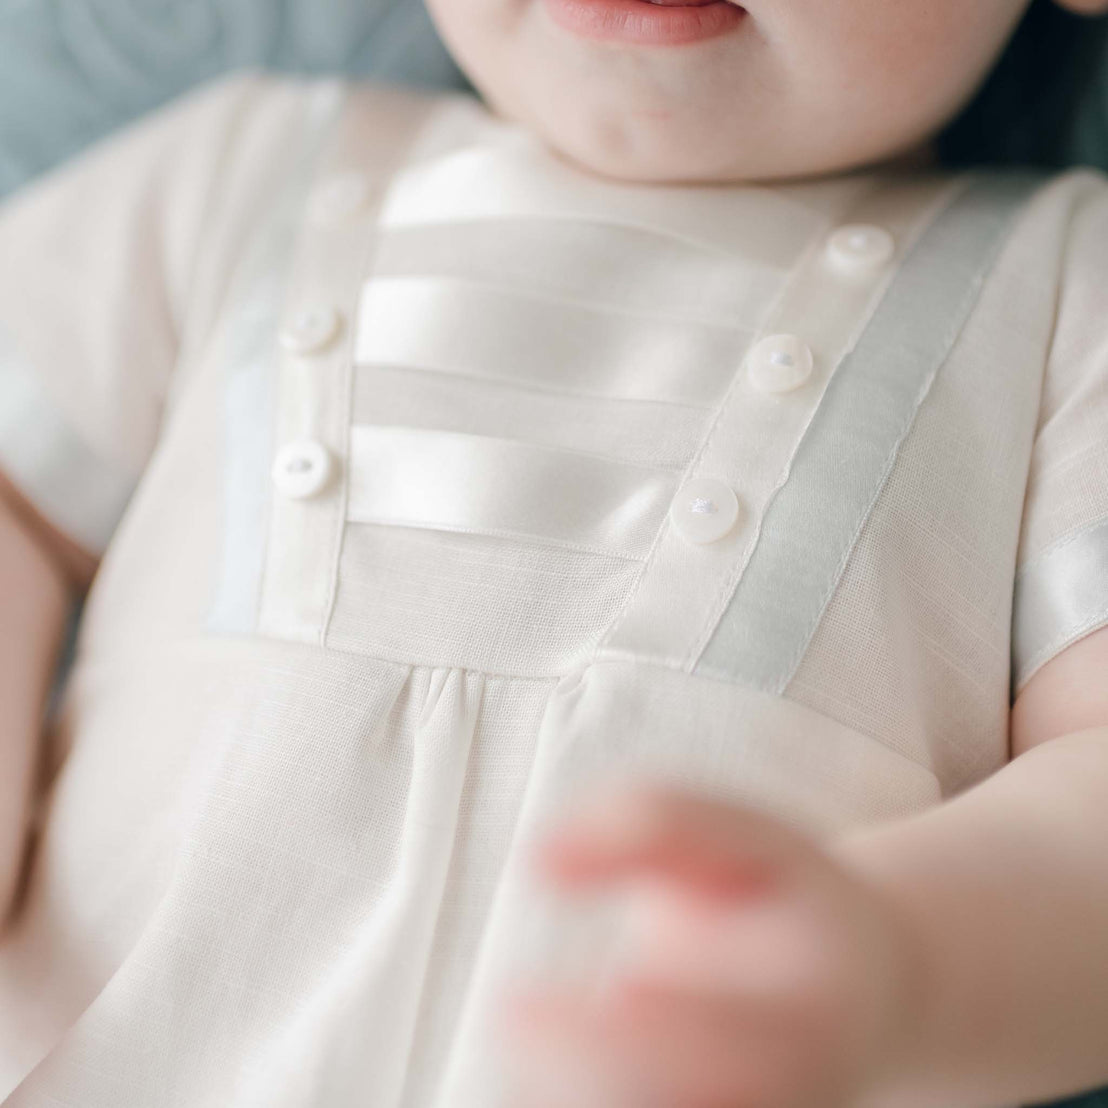 Close-up of a baby dressed in an Owen Linen Romper with button details, focusing on the outfit and partial view of the baby's hand.